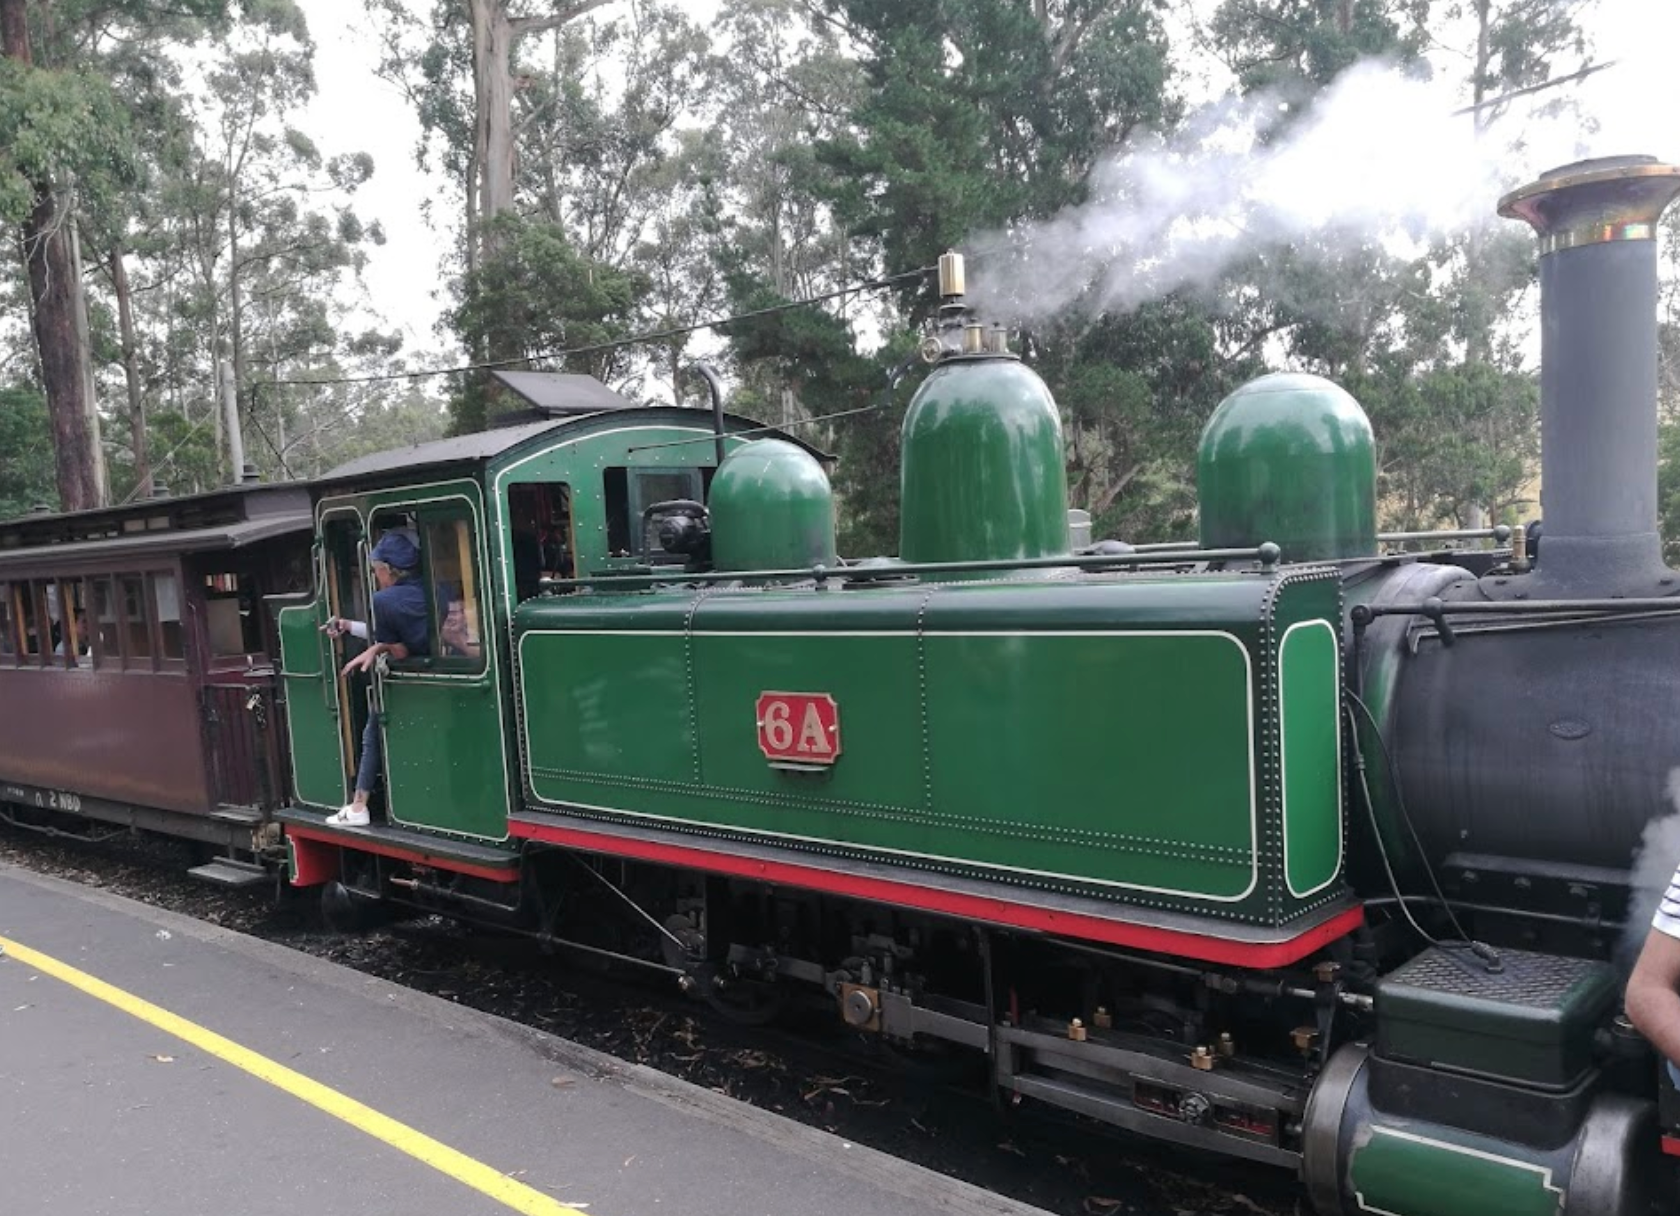 Gembrook Railway Station – Puffing Billy Railway